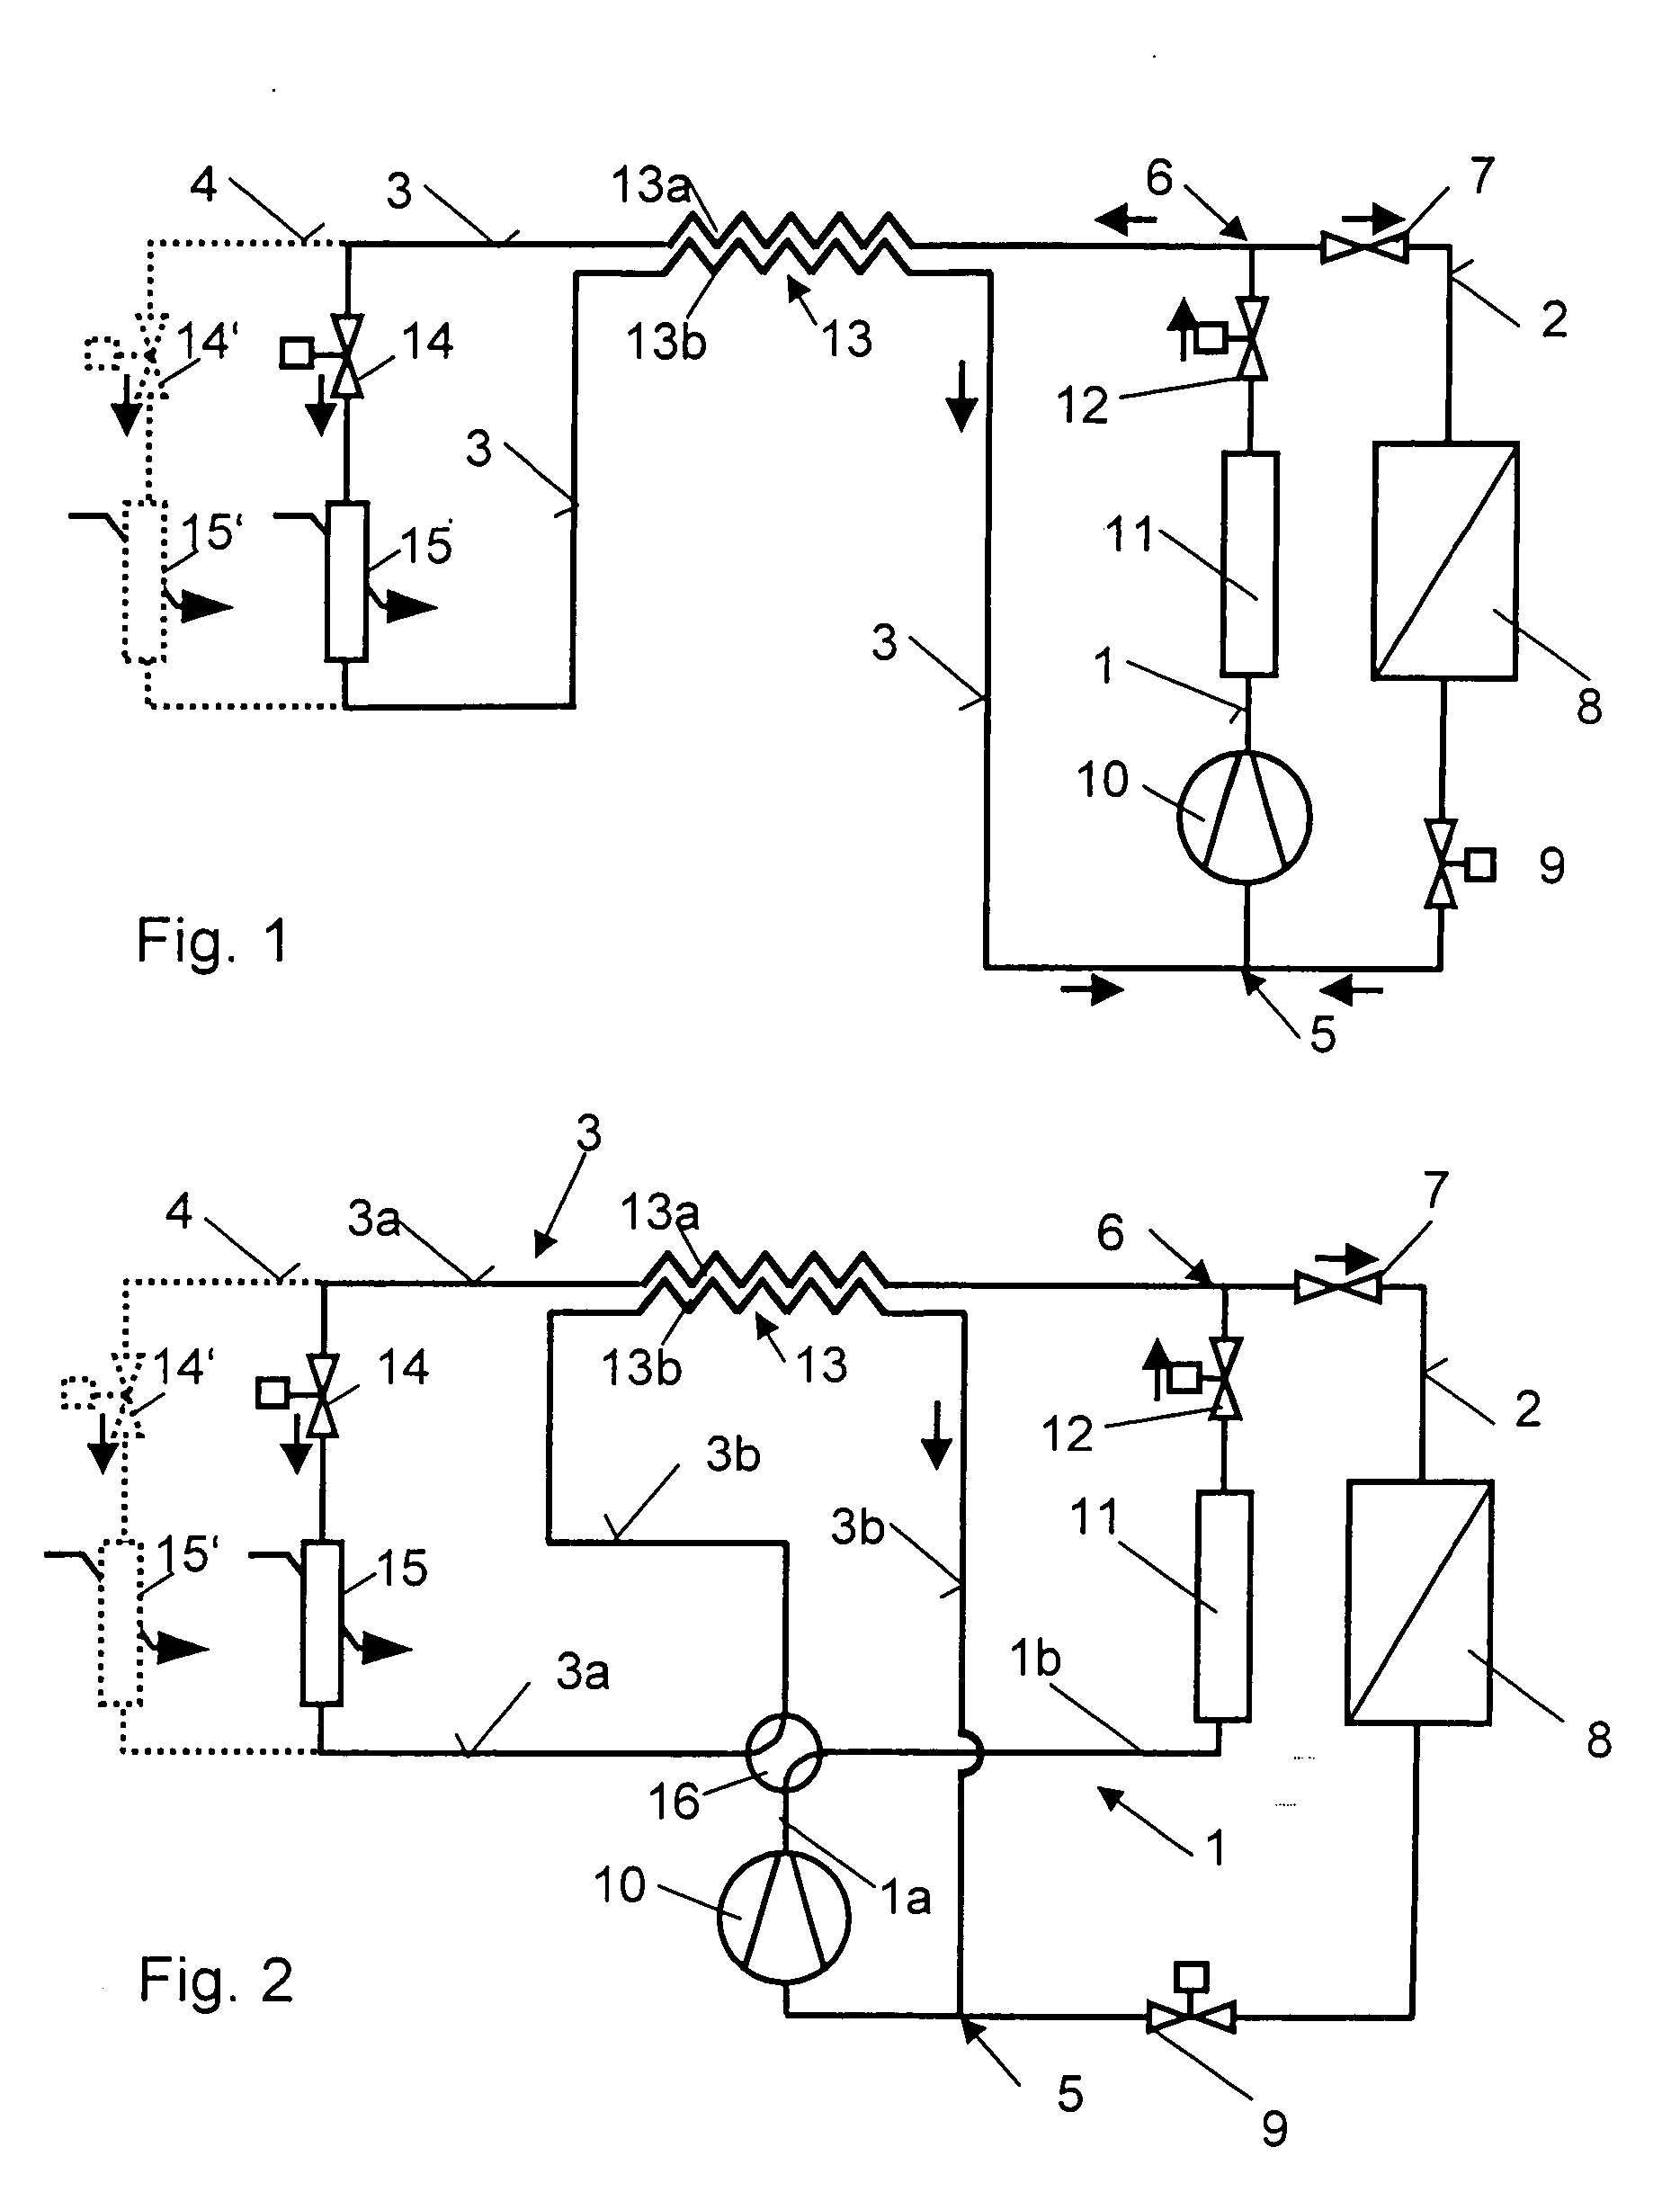 Vehicle with an air-conditioning system and a heat source